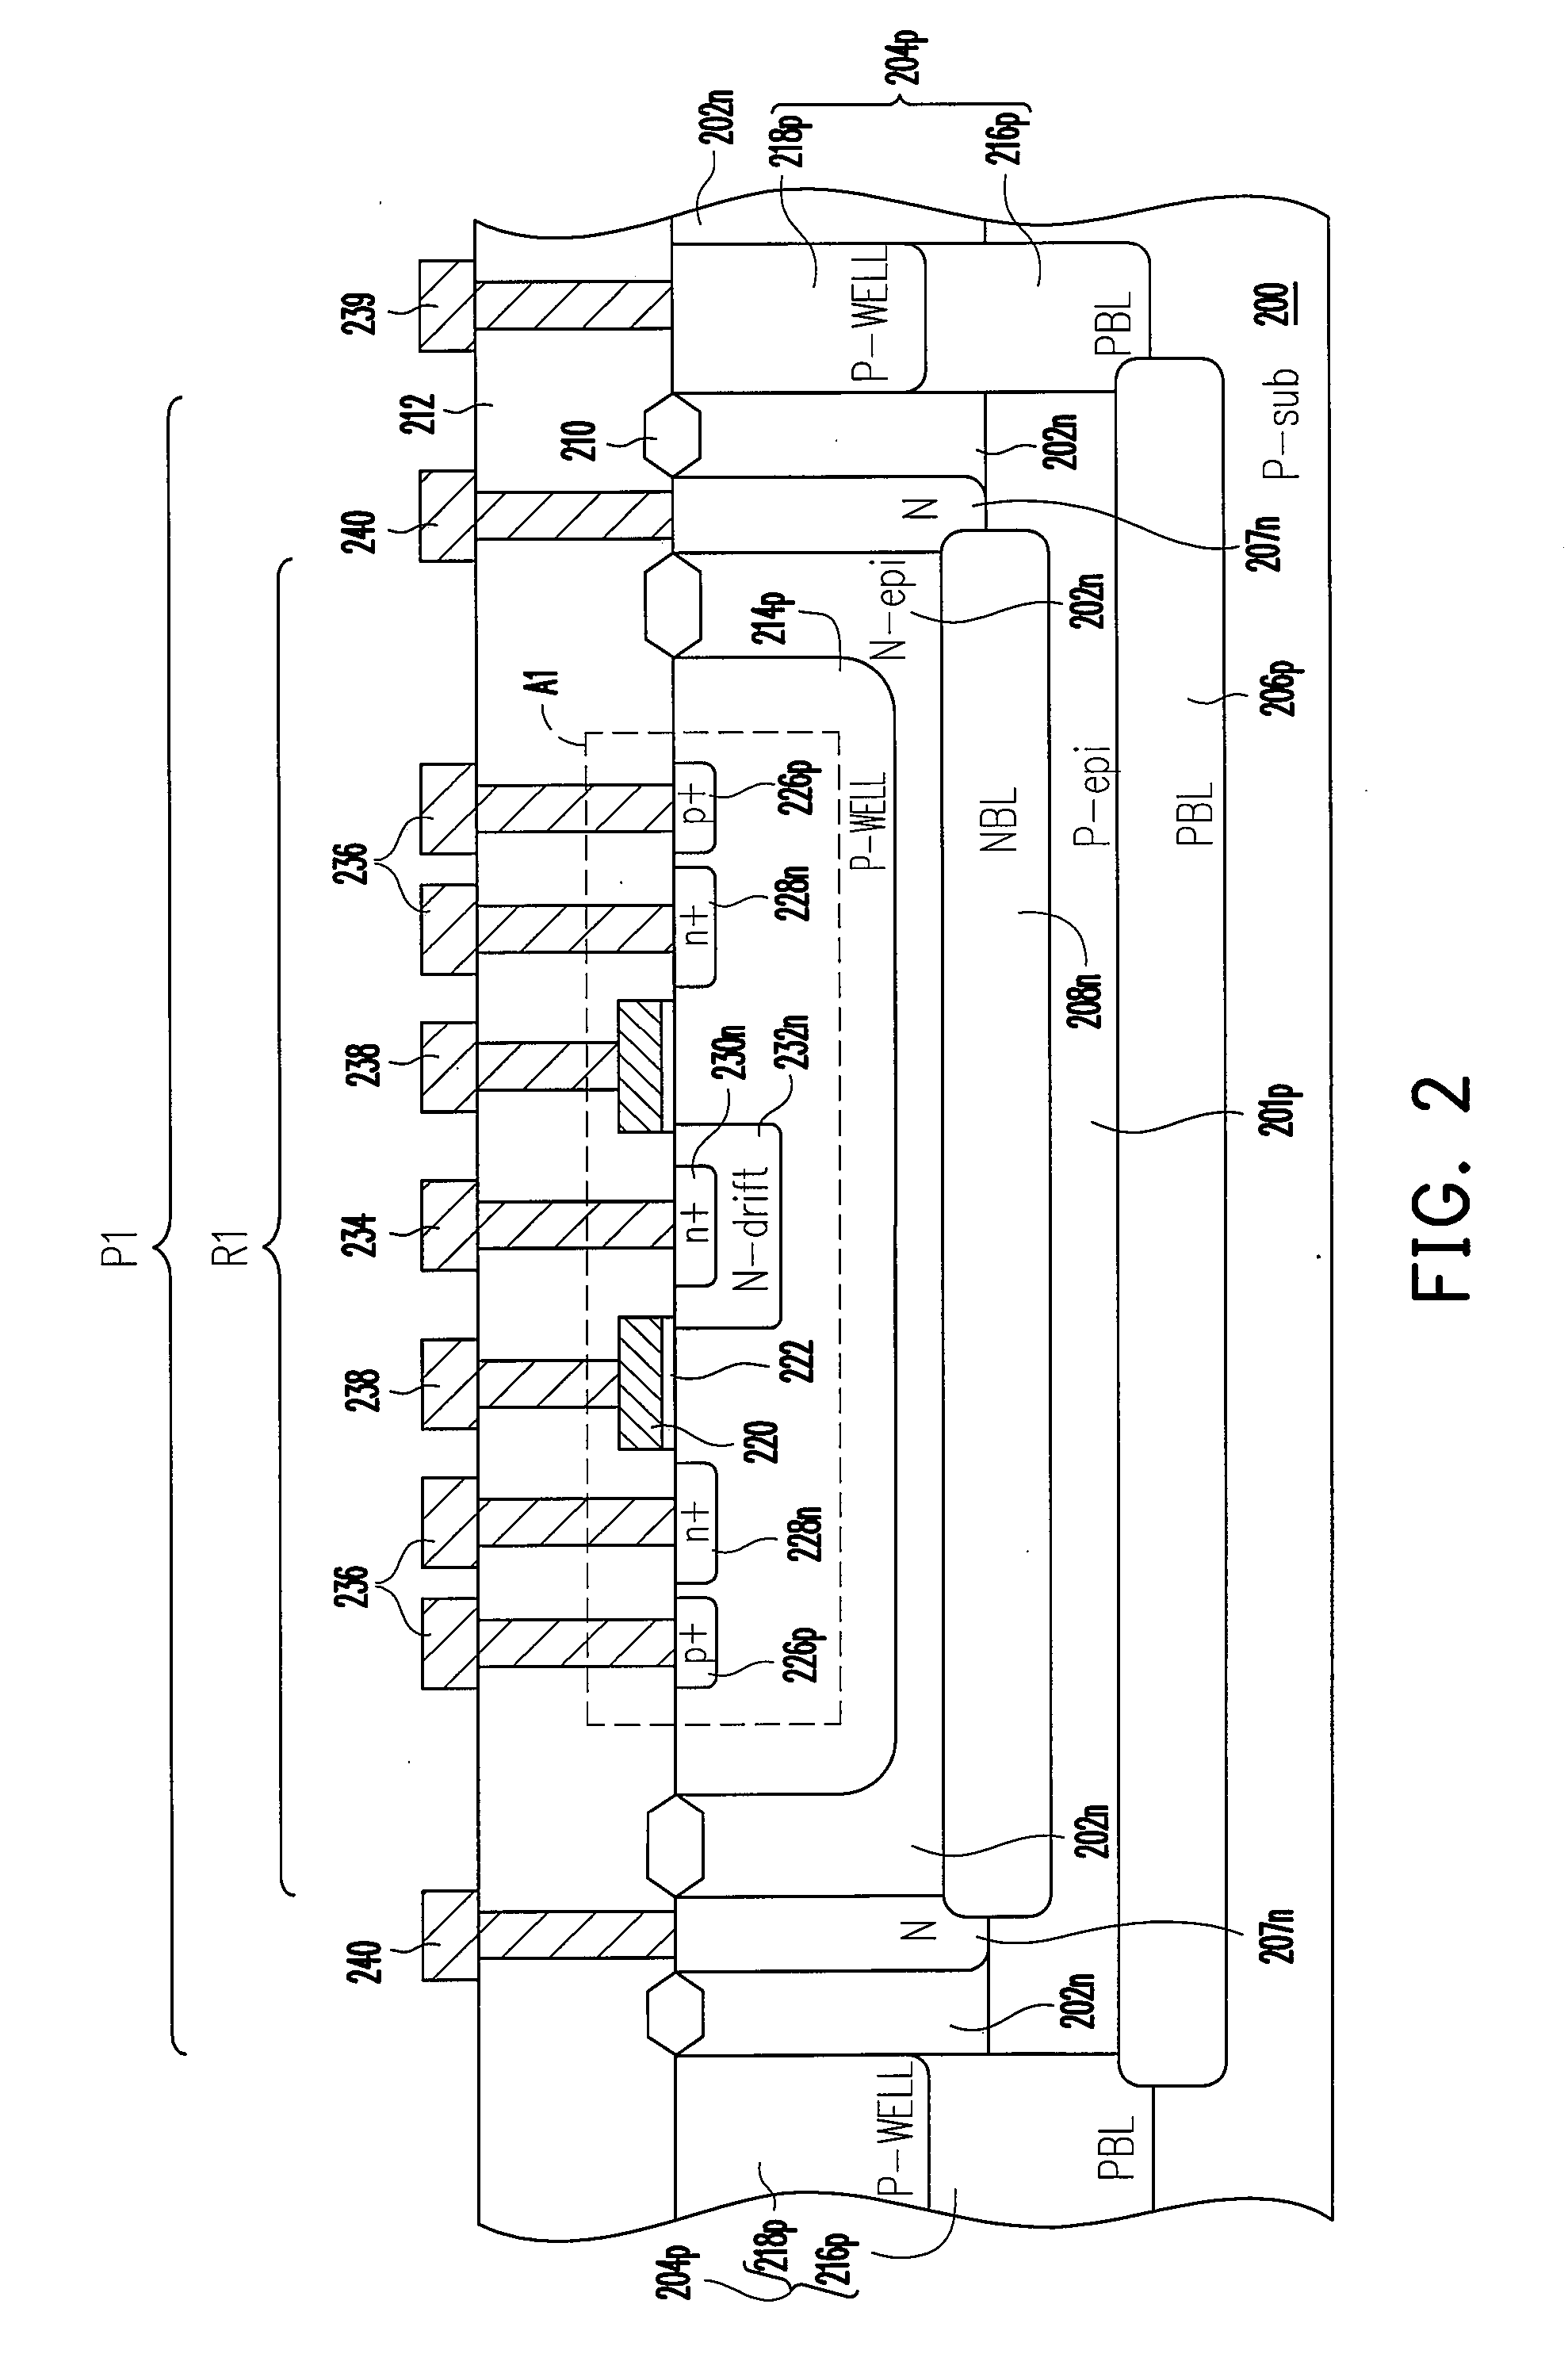 Semiconductor device and complementary metal-oxide-semiconductor transistor